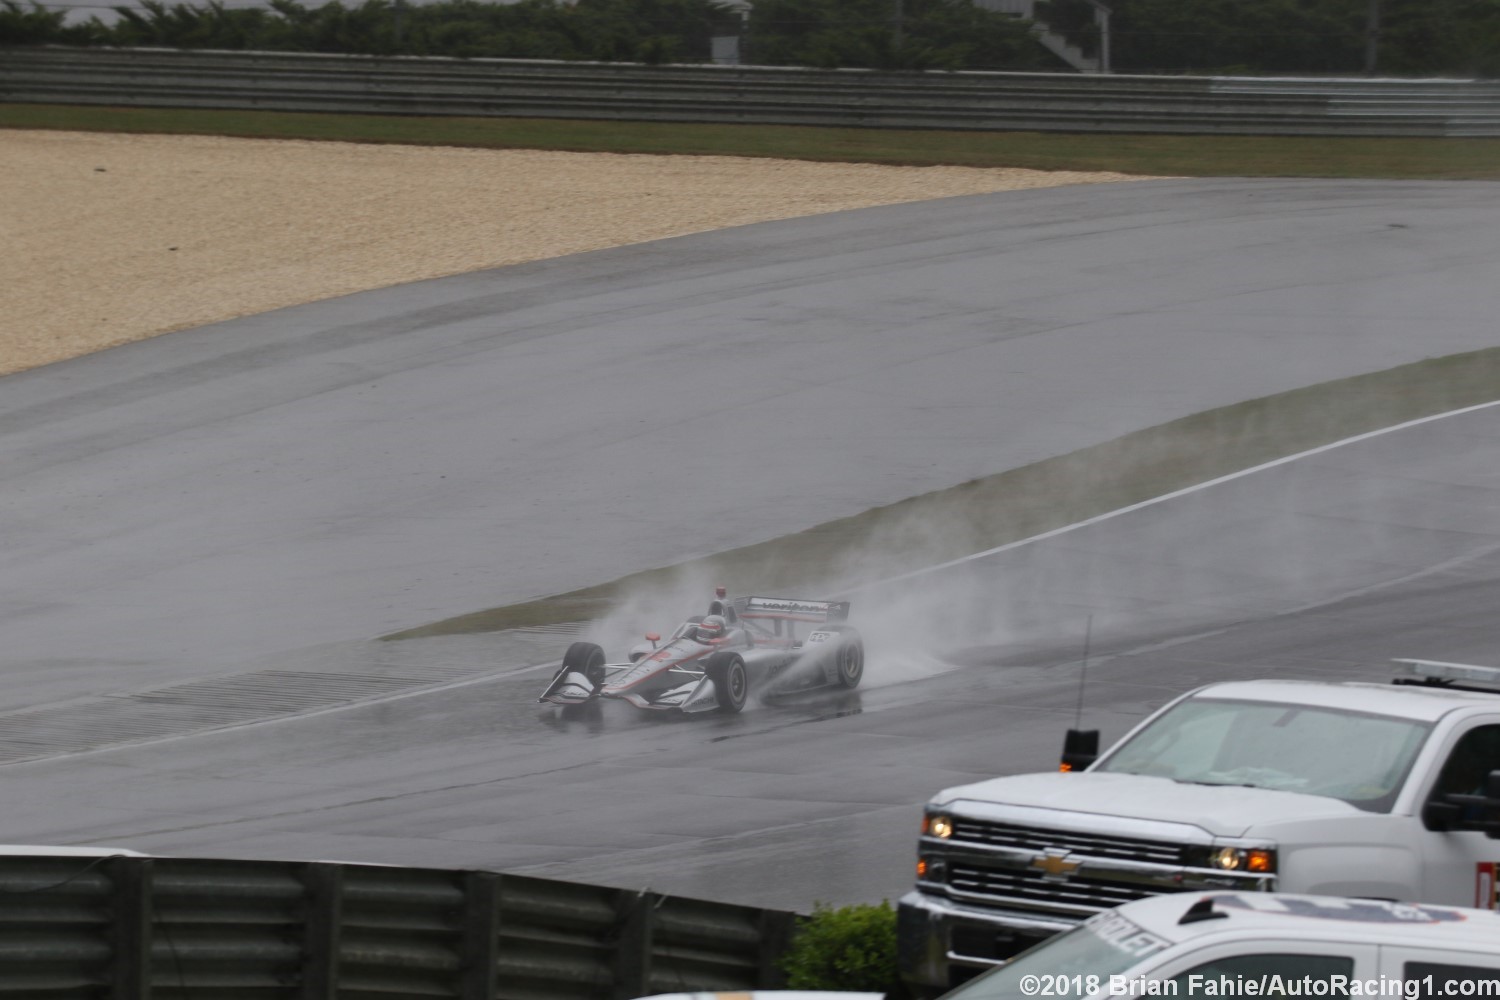 Will Power in the rain before he crashed